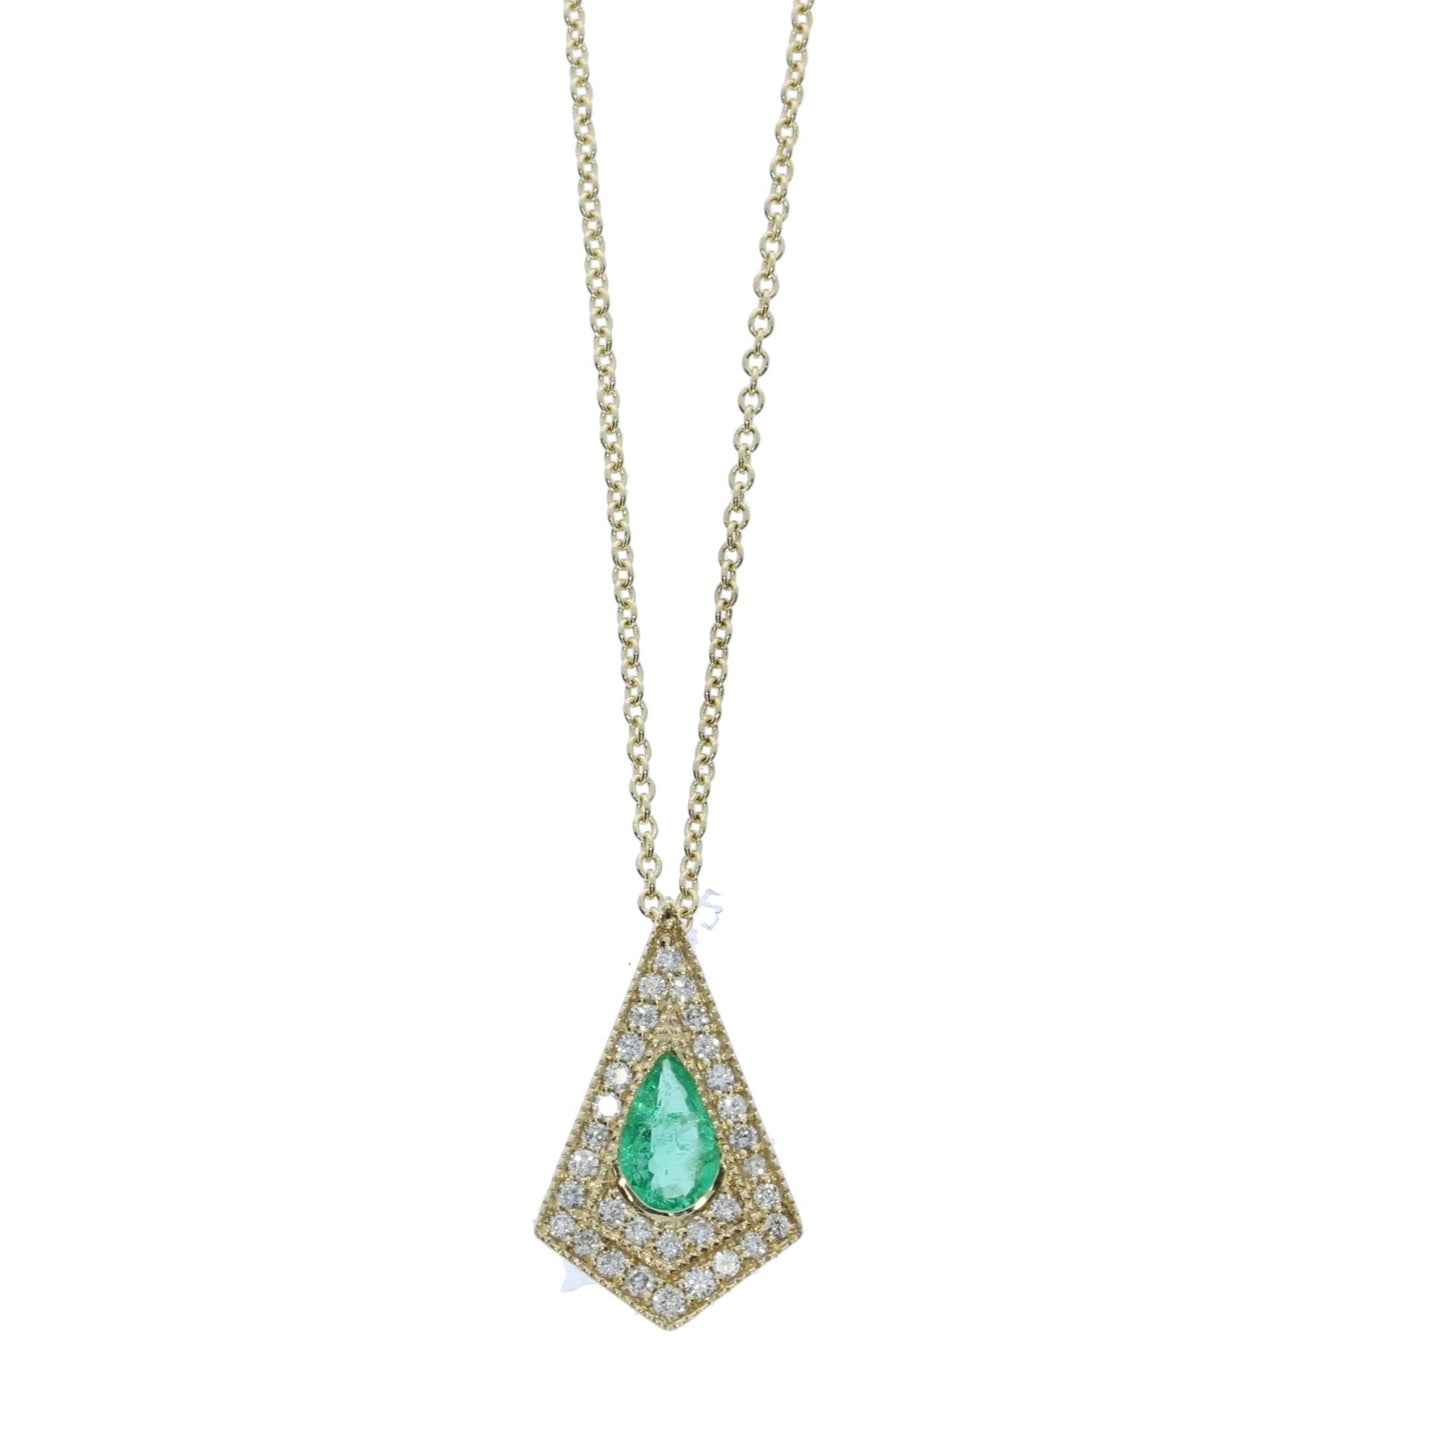 Yellow Gold Kite Shaped Emerald and Diamond Necklace